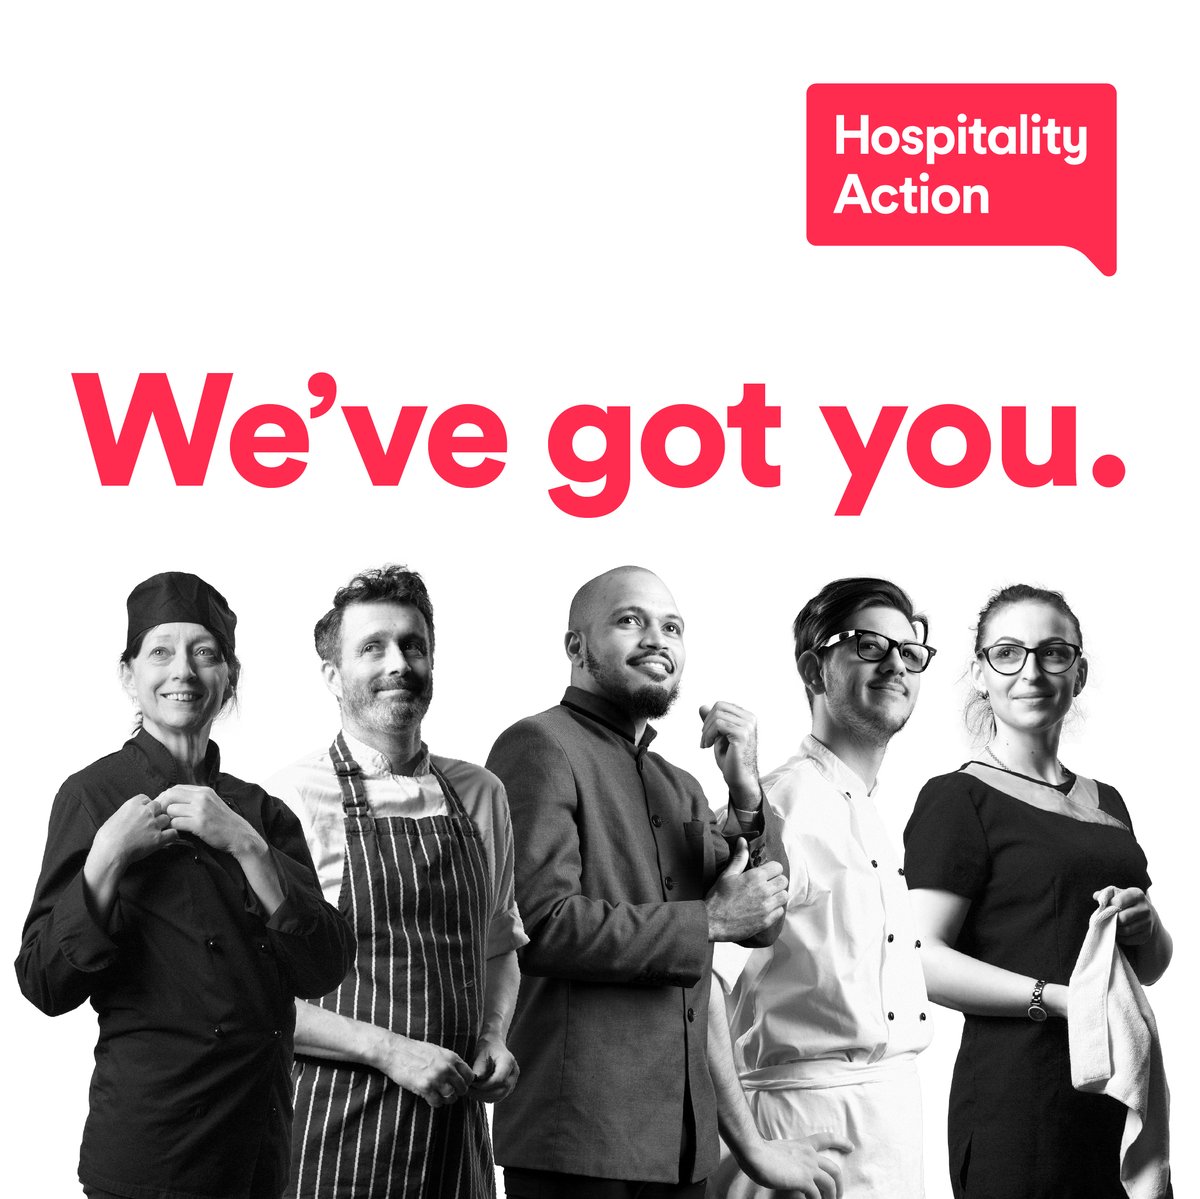 Serious illness, mental health issues, financial difficulties, family problems, or addiction: whatever challenges you might face, remember Hospitality Action is here to get you back on your feet. Learn more: hospitalityaction.org.uk #wevgotyou